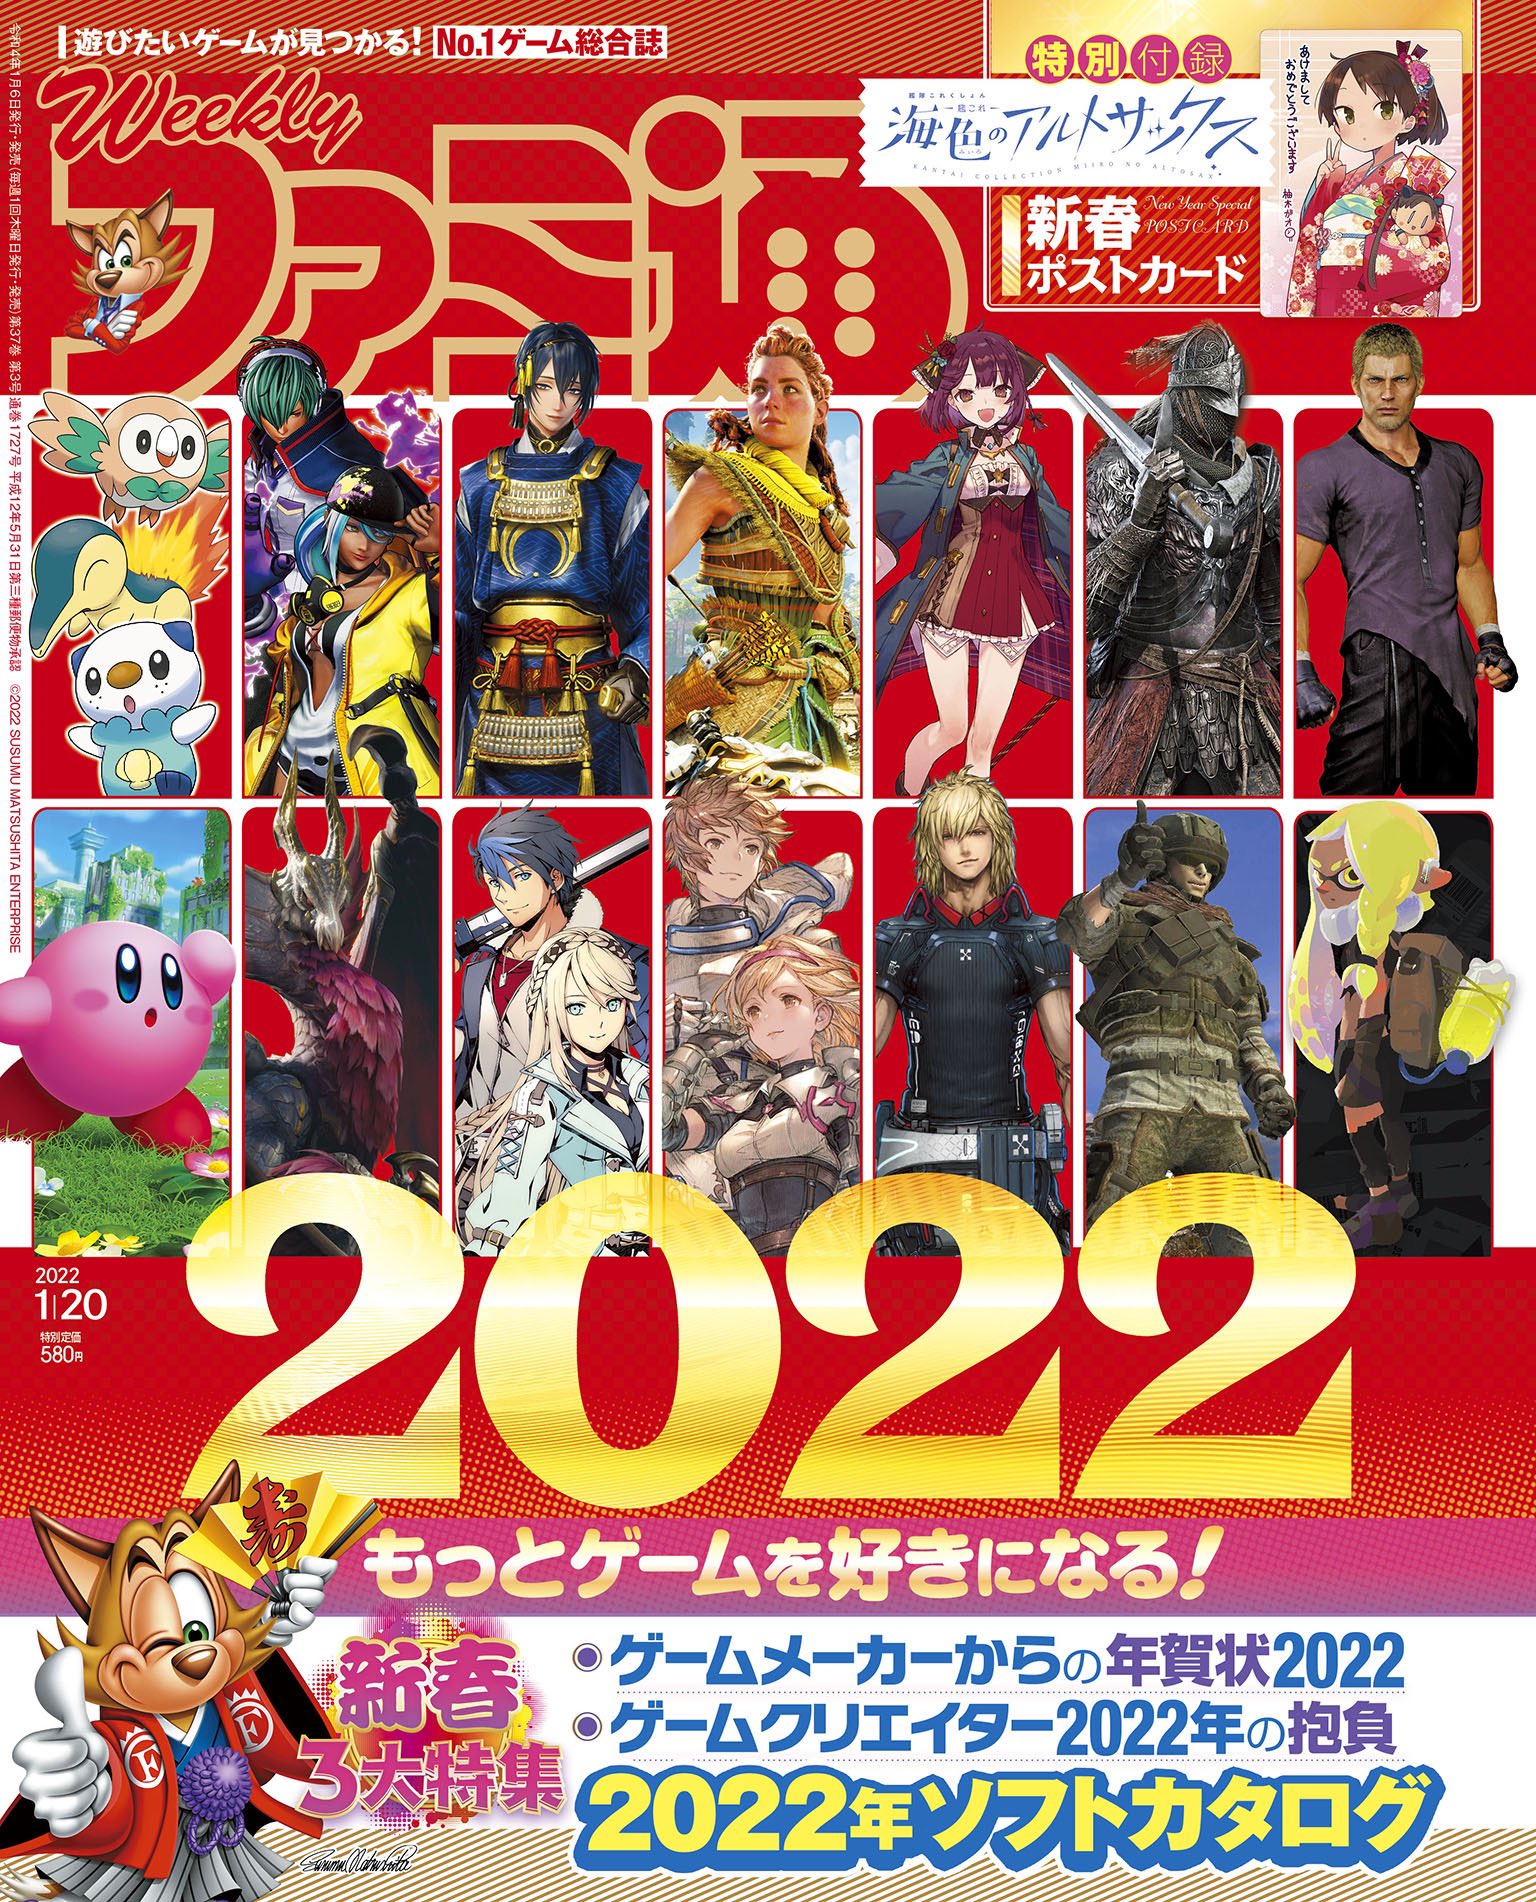 January 20th issue of Famitsu